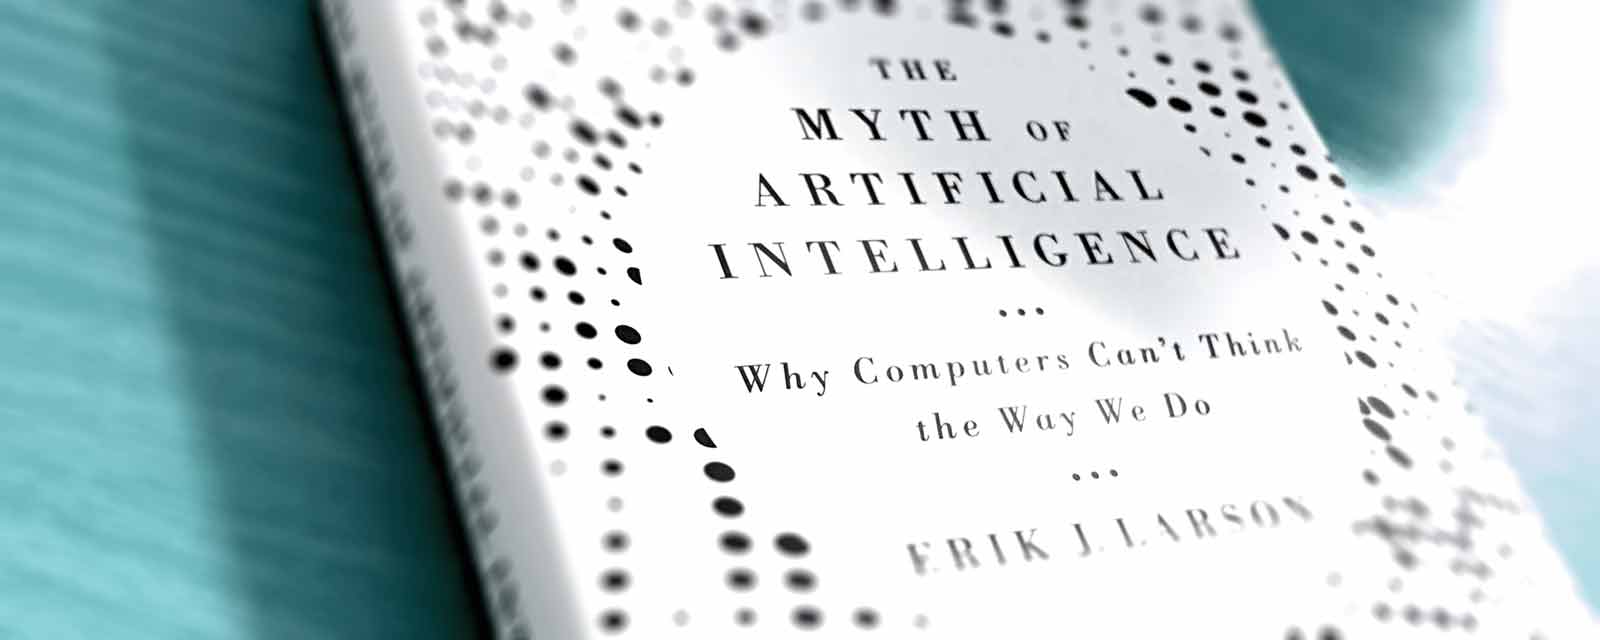 Book review: The Myth of Artificial Intelligence